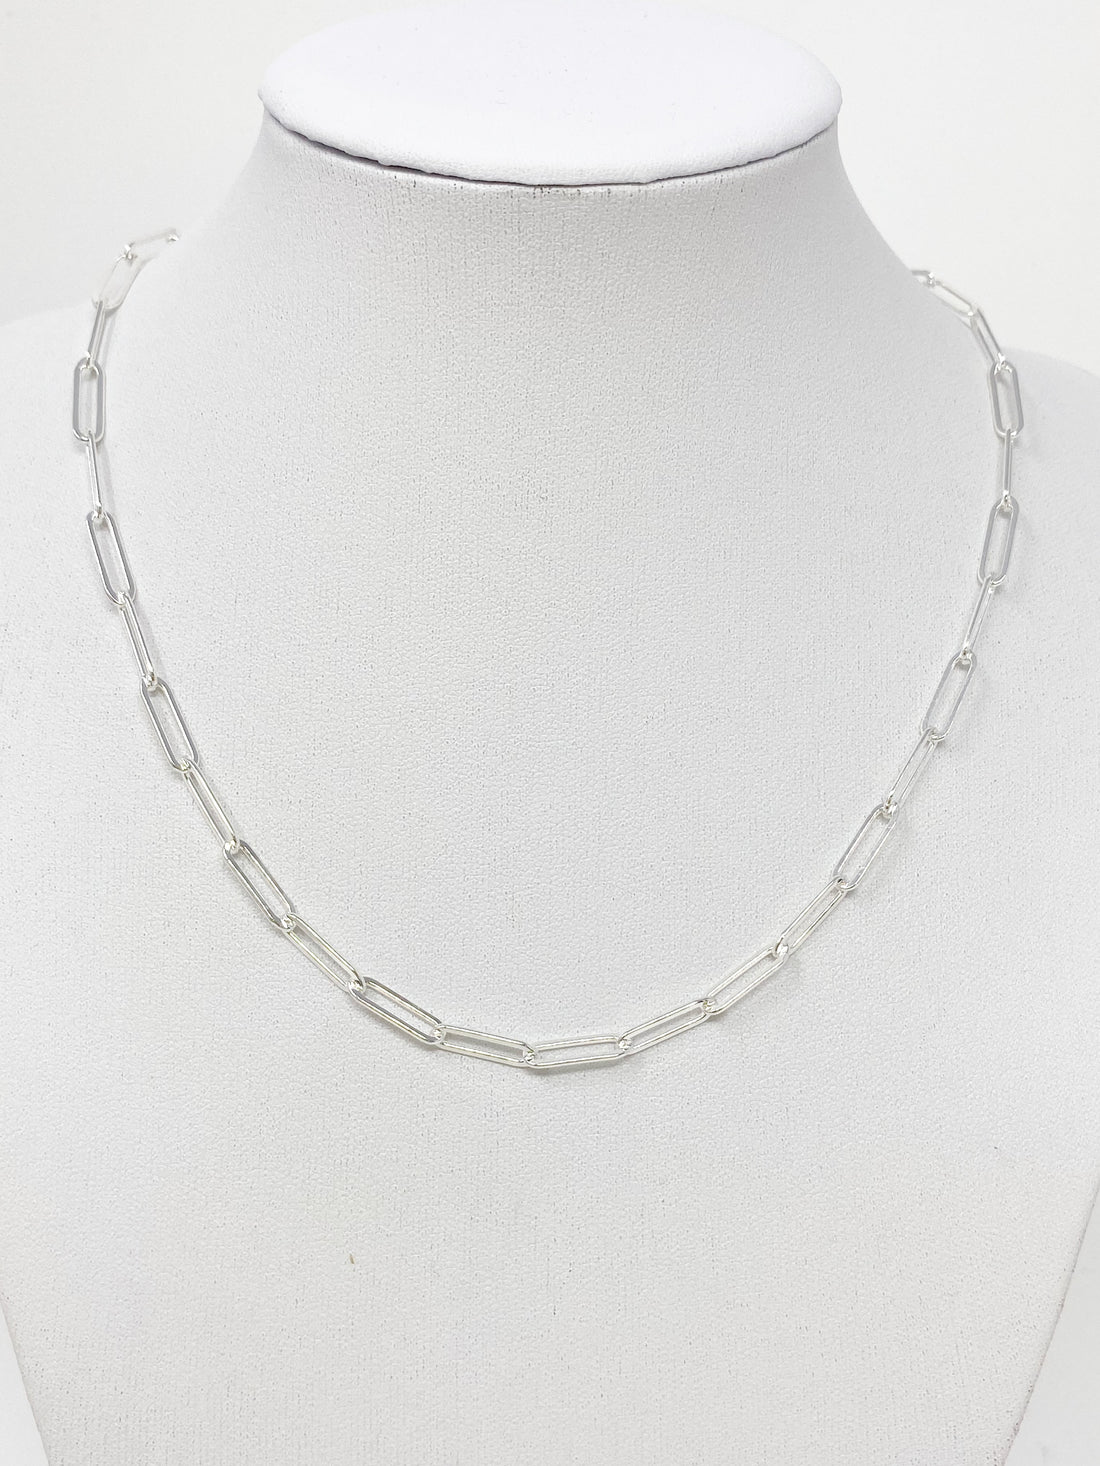 Anne Chainlink Necklace in Sterling Silver